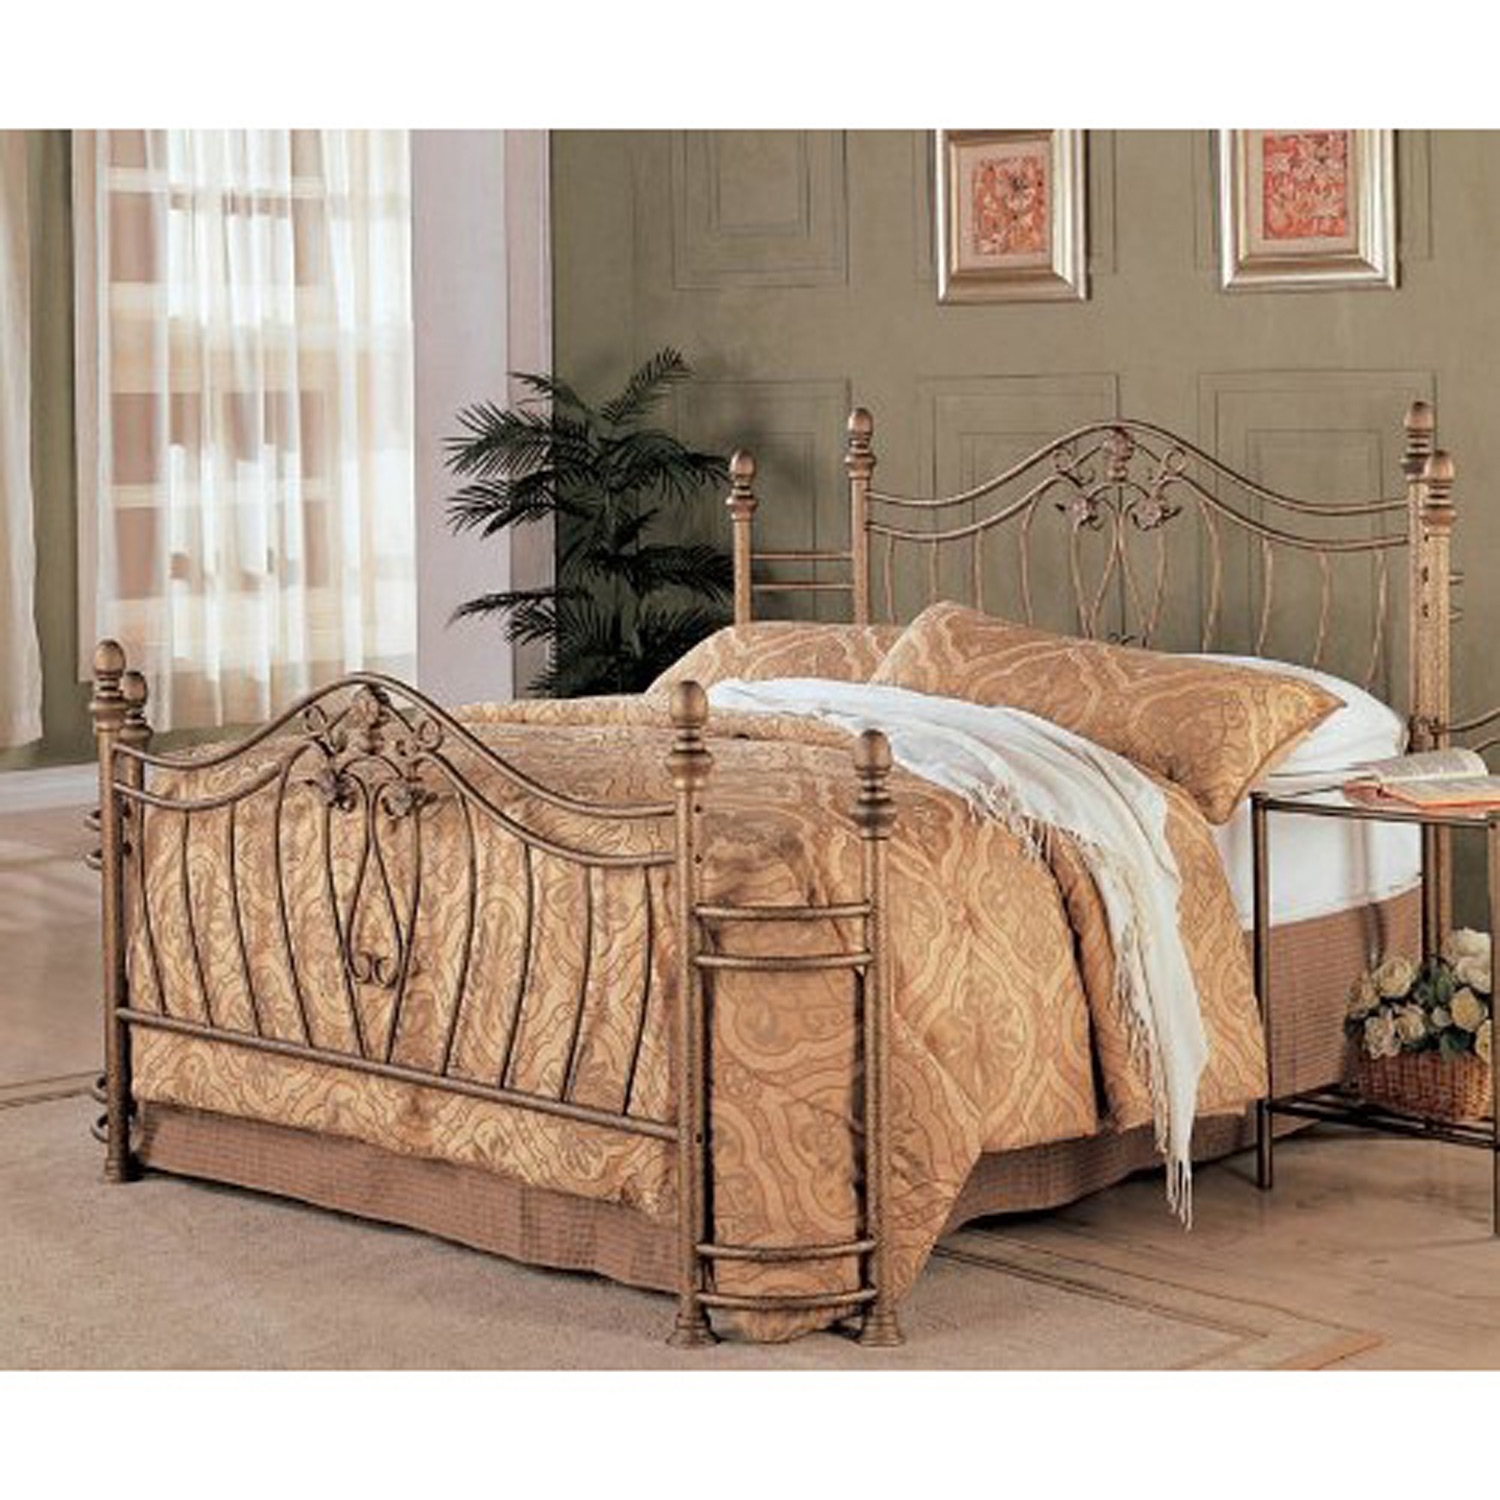 Queen Size Metal Bed With Headboard And, Antique Gold Bed Frame